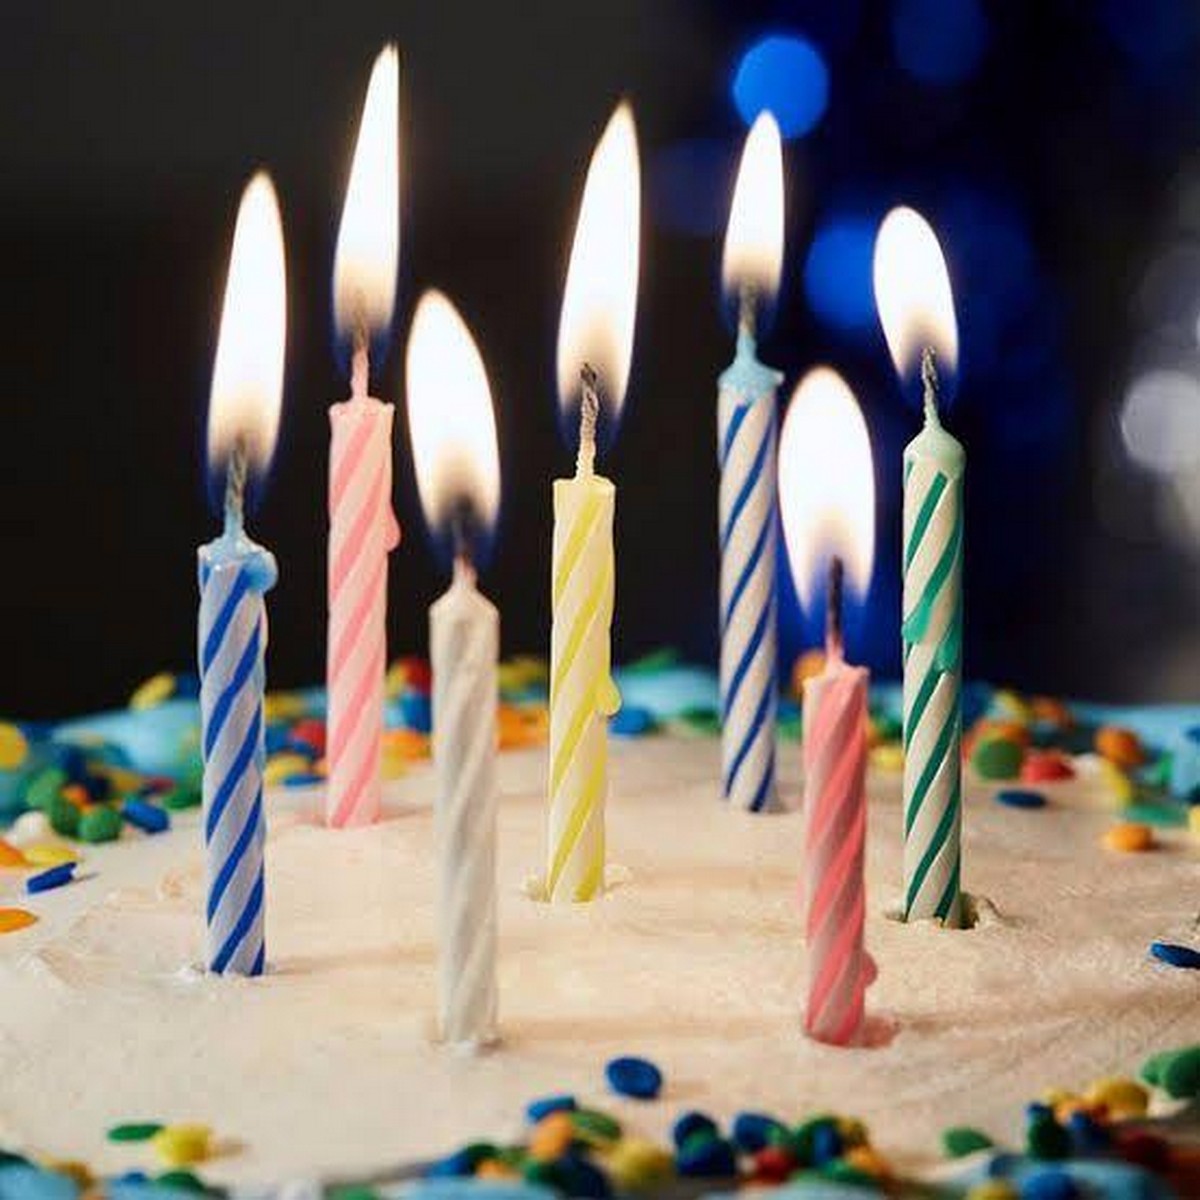 Birthday Sparklers | Cake and Candle Sparkler Options for Birthdays